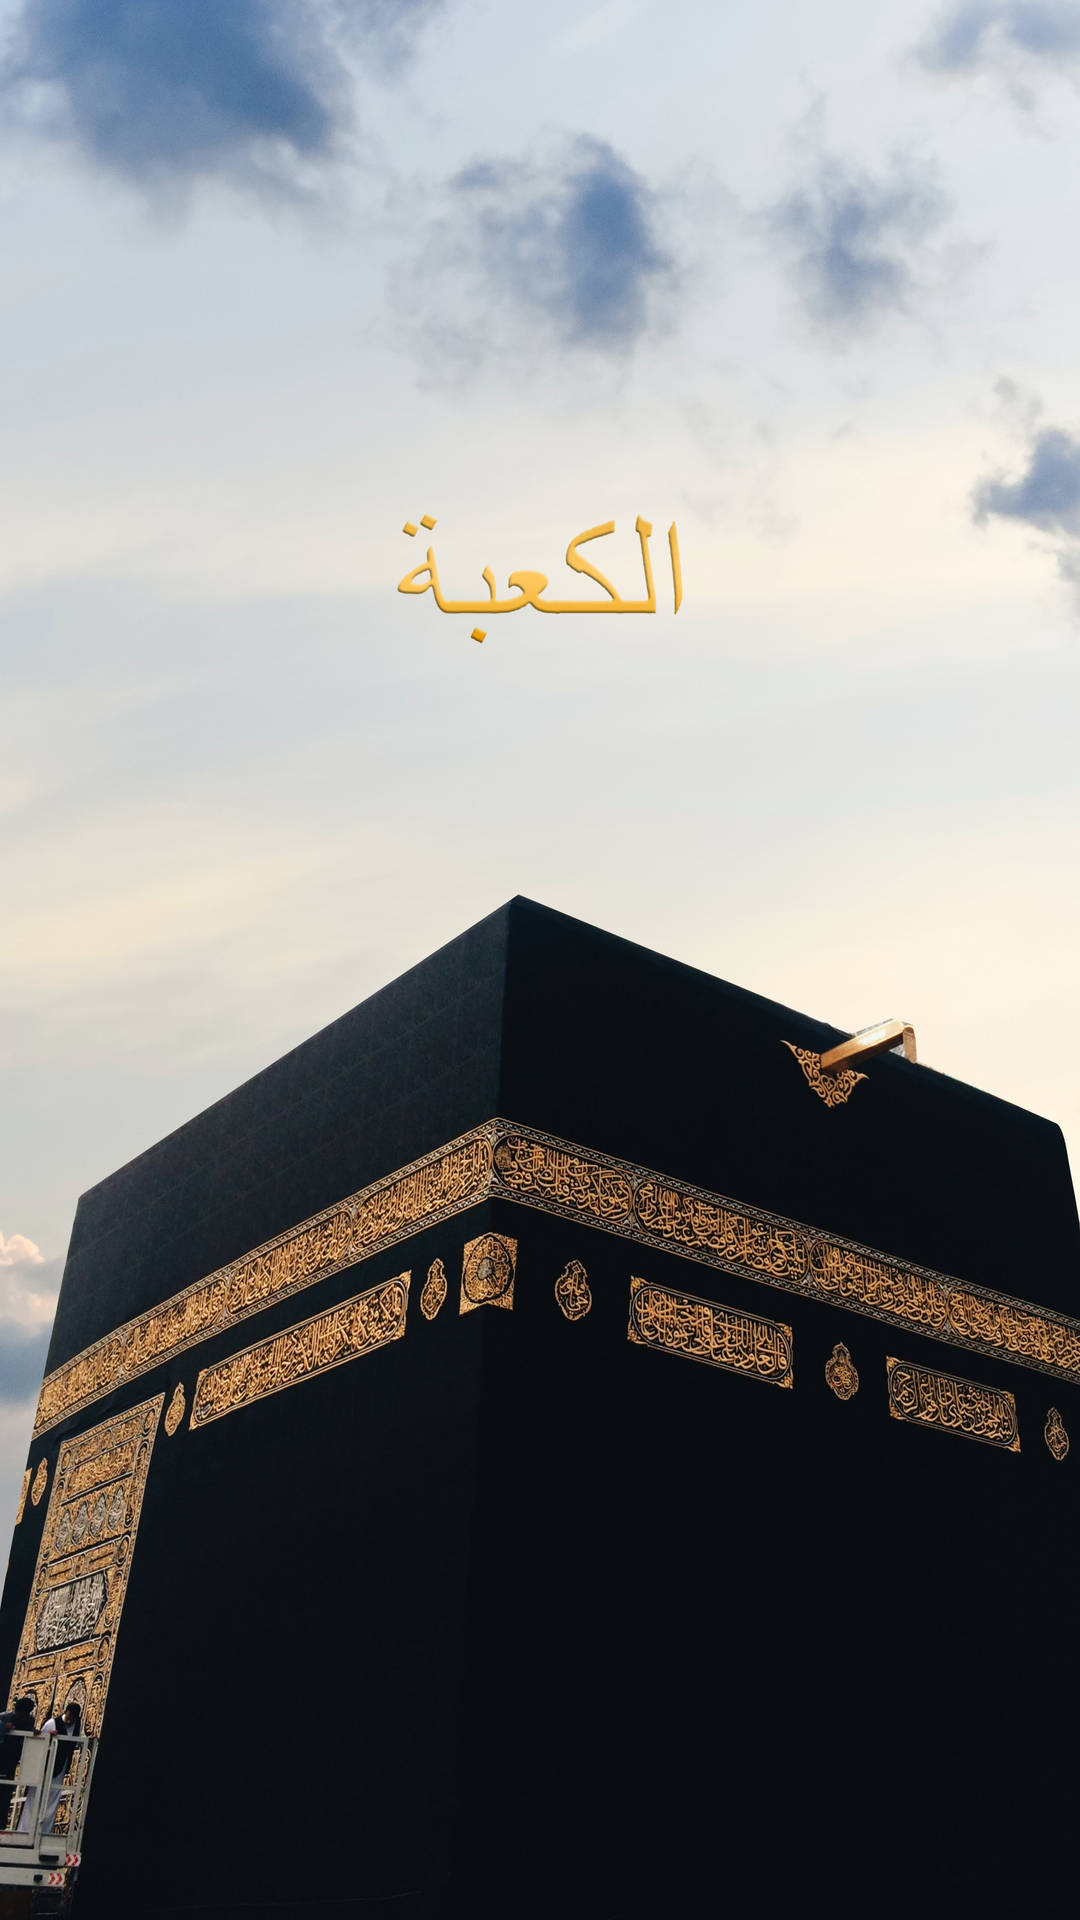 Caption: Majestic View Of The Kaaba With Golden Arabic Inscriptions Background